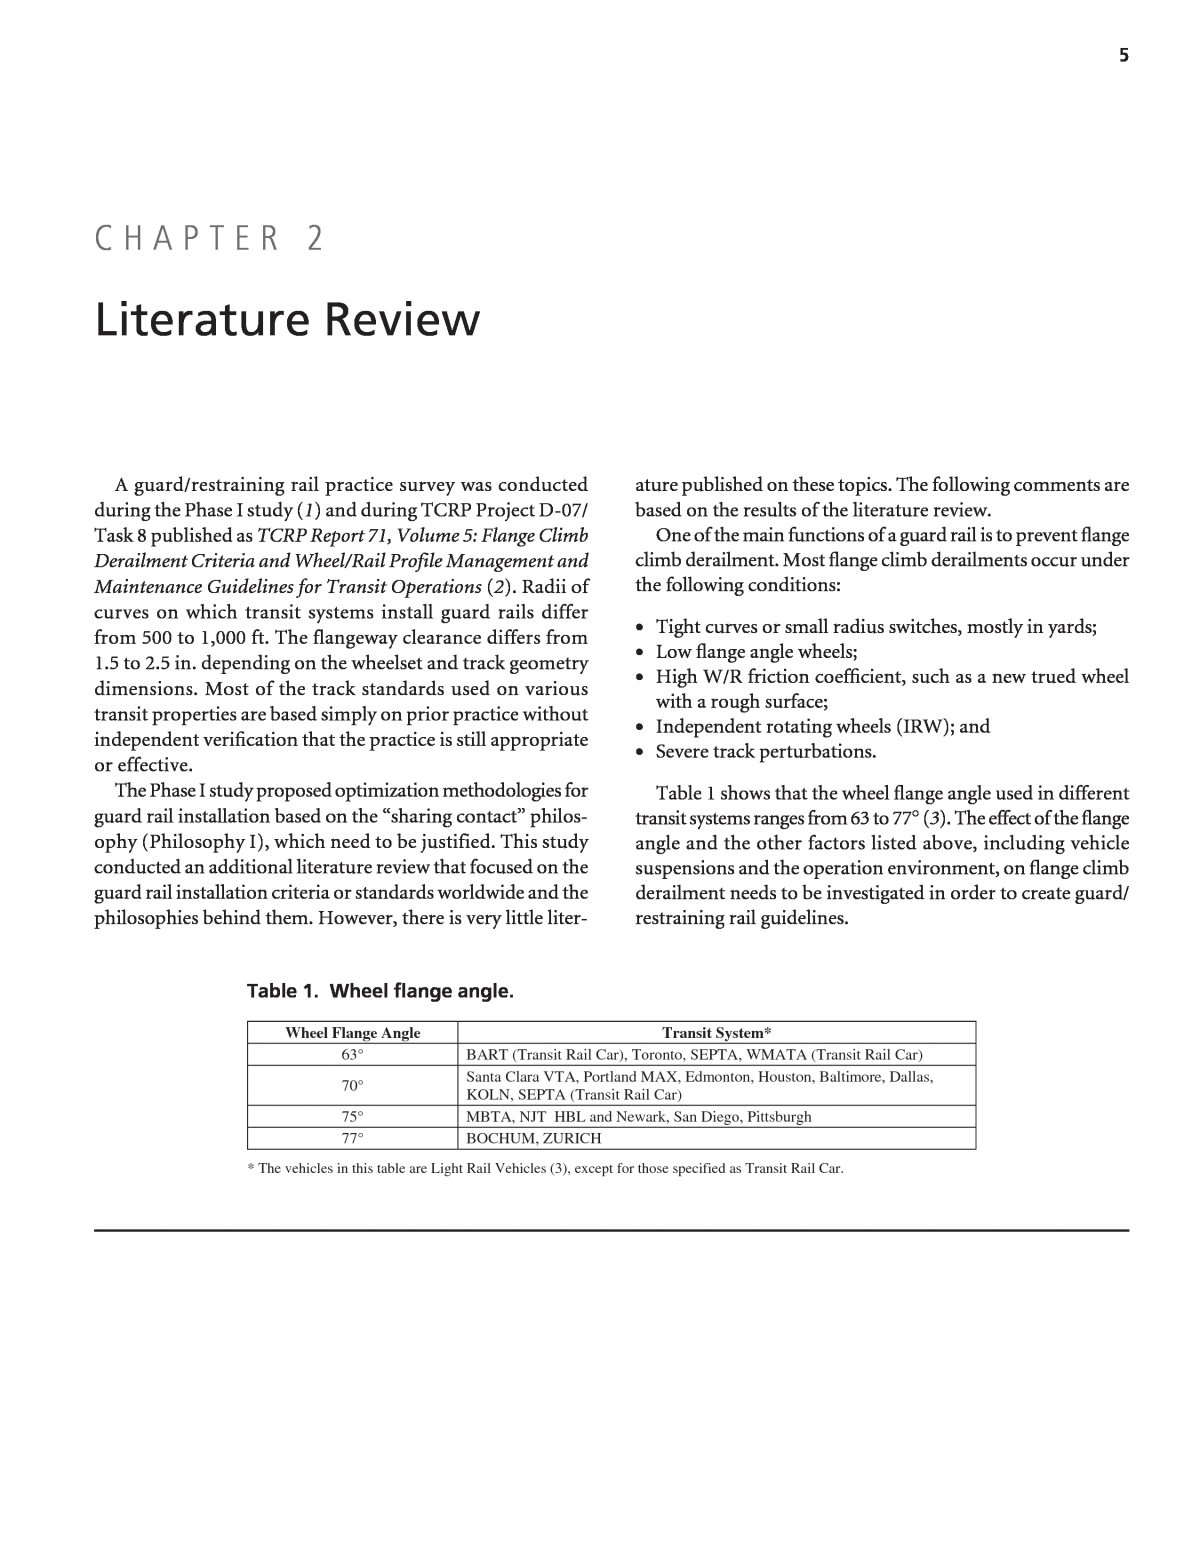 Review of related literature for ordering system